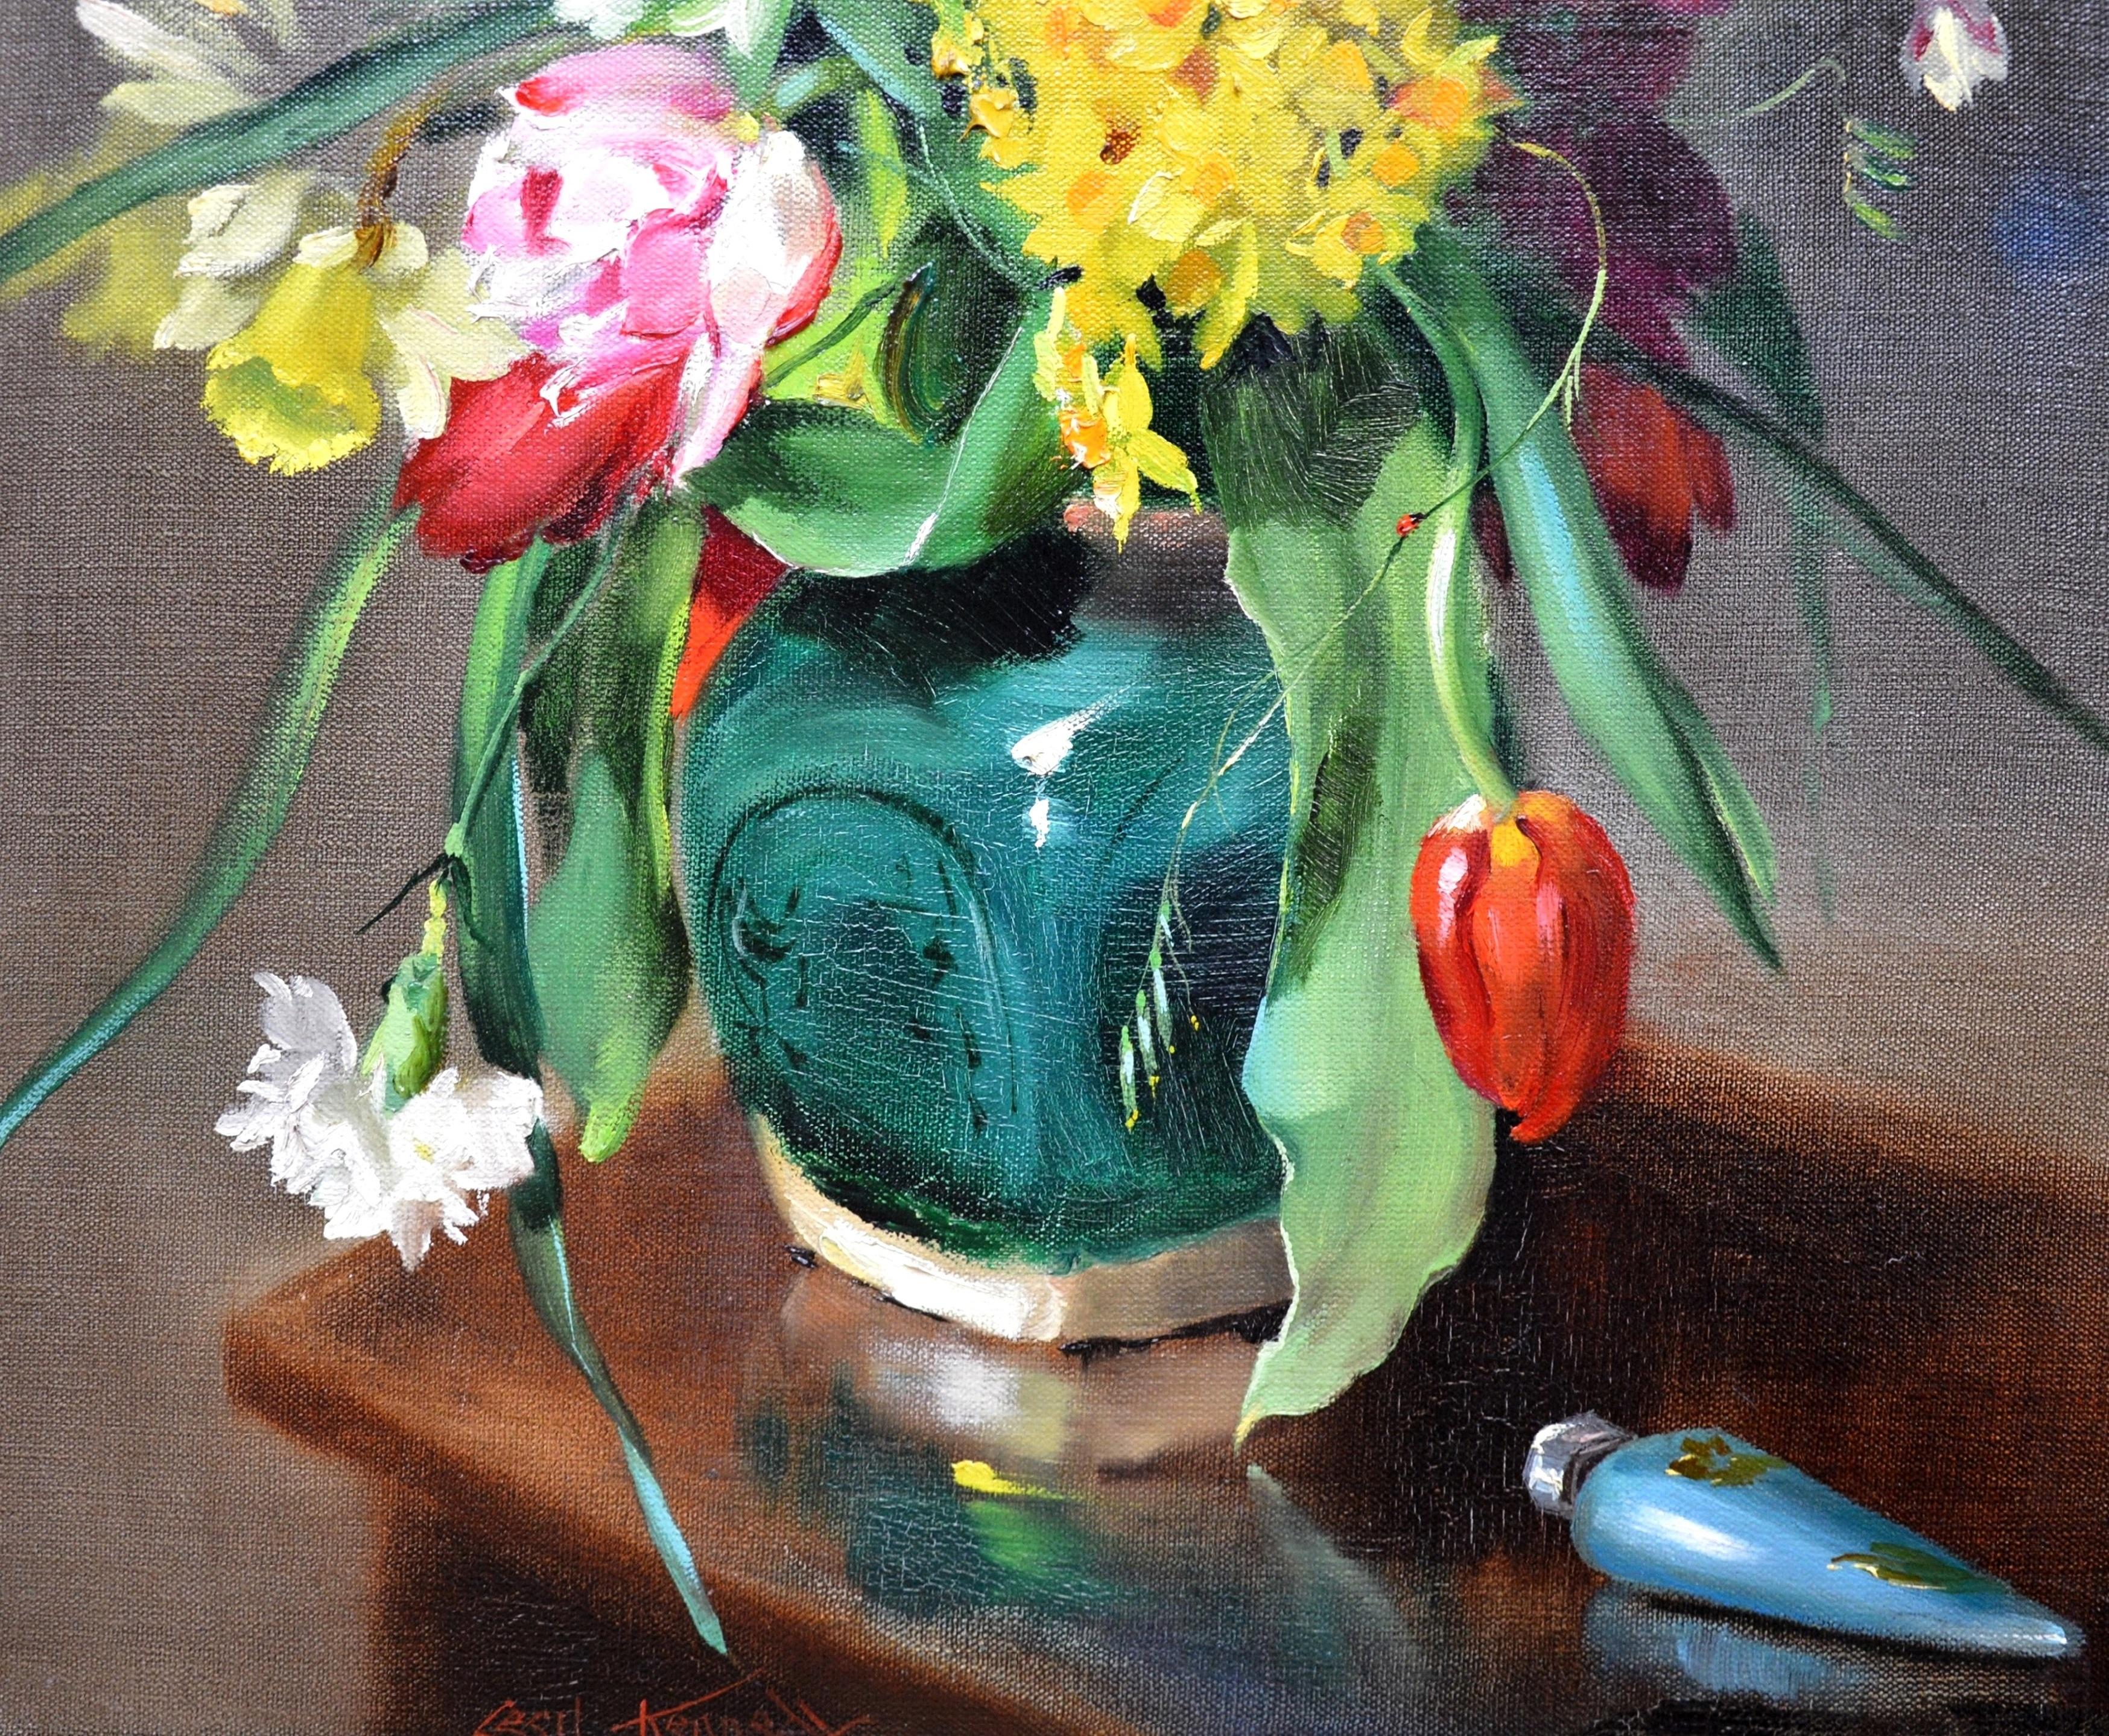 This is a fine large floral still life oil painting depicting a springtime arrangement of ‘Tulips & Daffodils’ in a green glazed vase by the celebrated British painter Cecil Kennedy (1905-1997). The painting is signed by the artist, and hangs in a